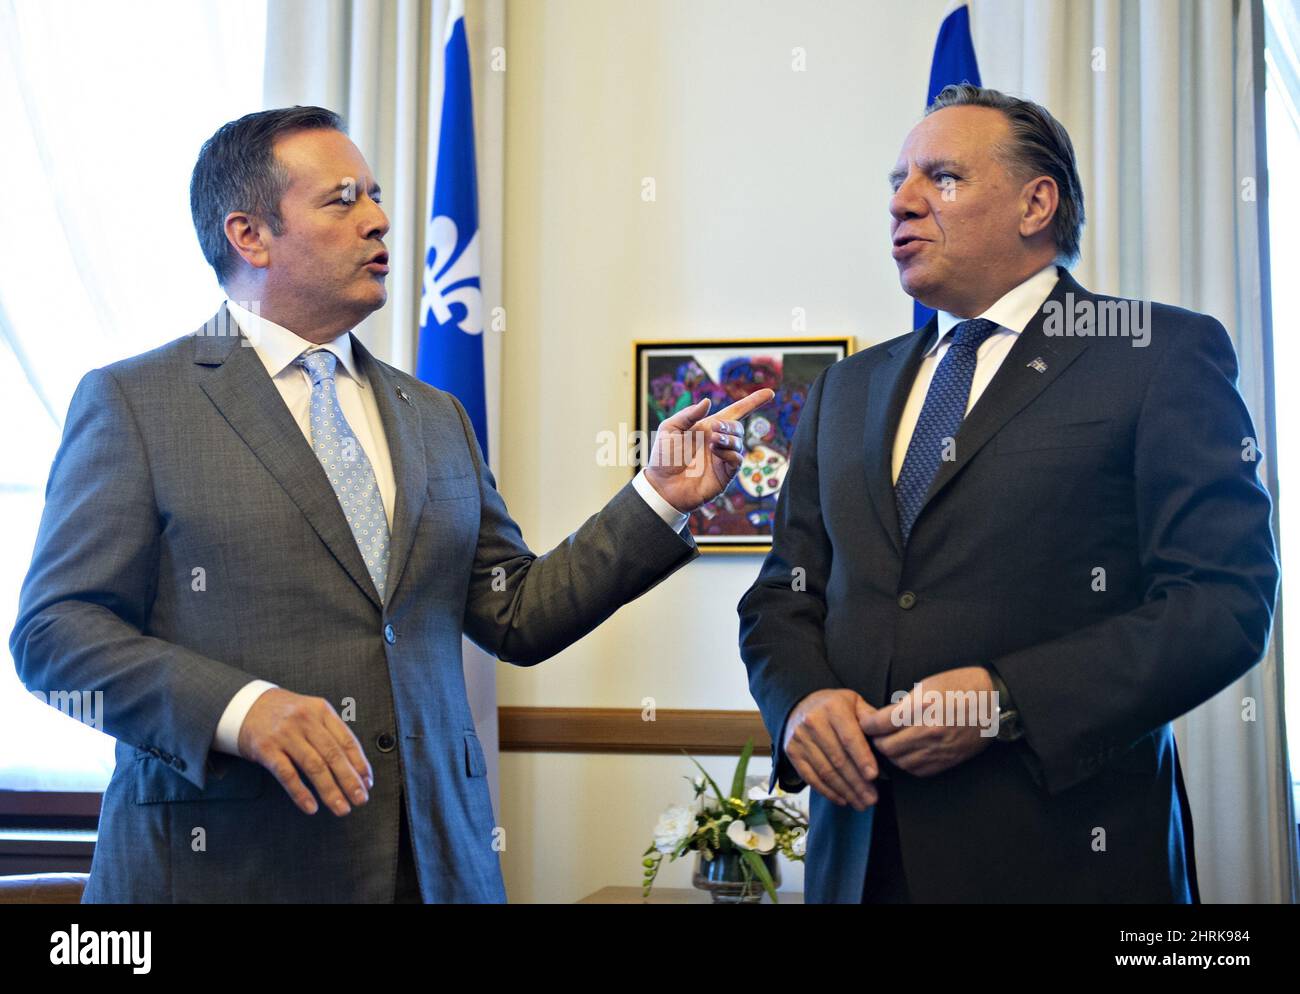 Alberta Premier Jason Kenney, left, chats with Quebec Premier Francois Legault on Wednesday, June 12, 2019 at the Quebec Premier's office in Quebec City. Kenney said Monday his Quebec counterpart does not understand the history of equalization.THE CANADIAN PRESS/Jacques Boissinot Stock Photo